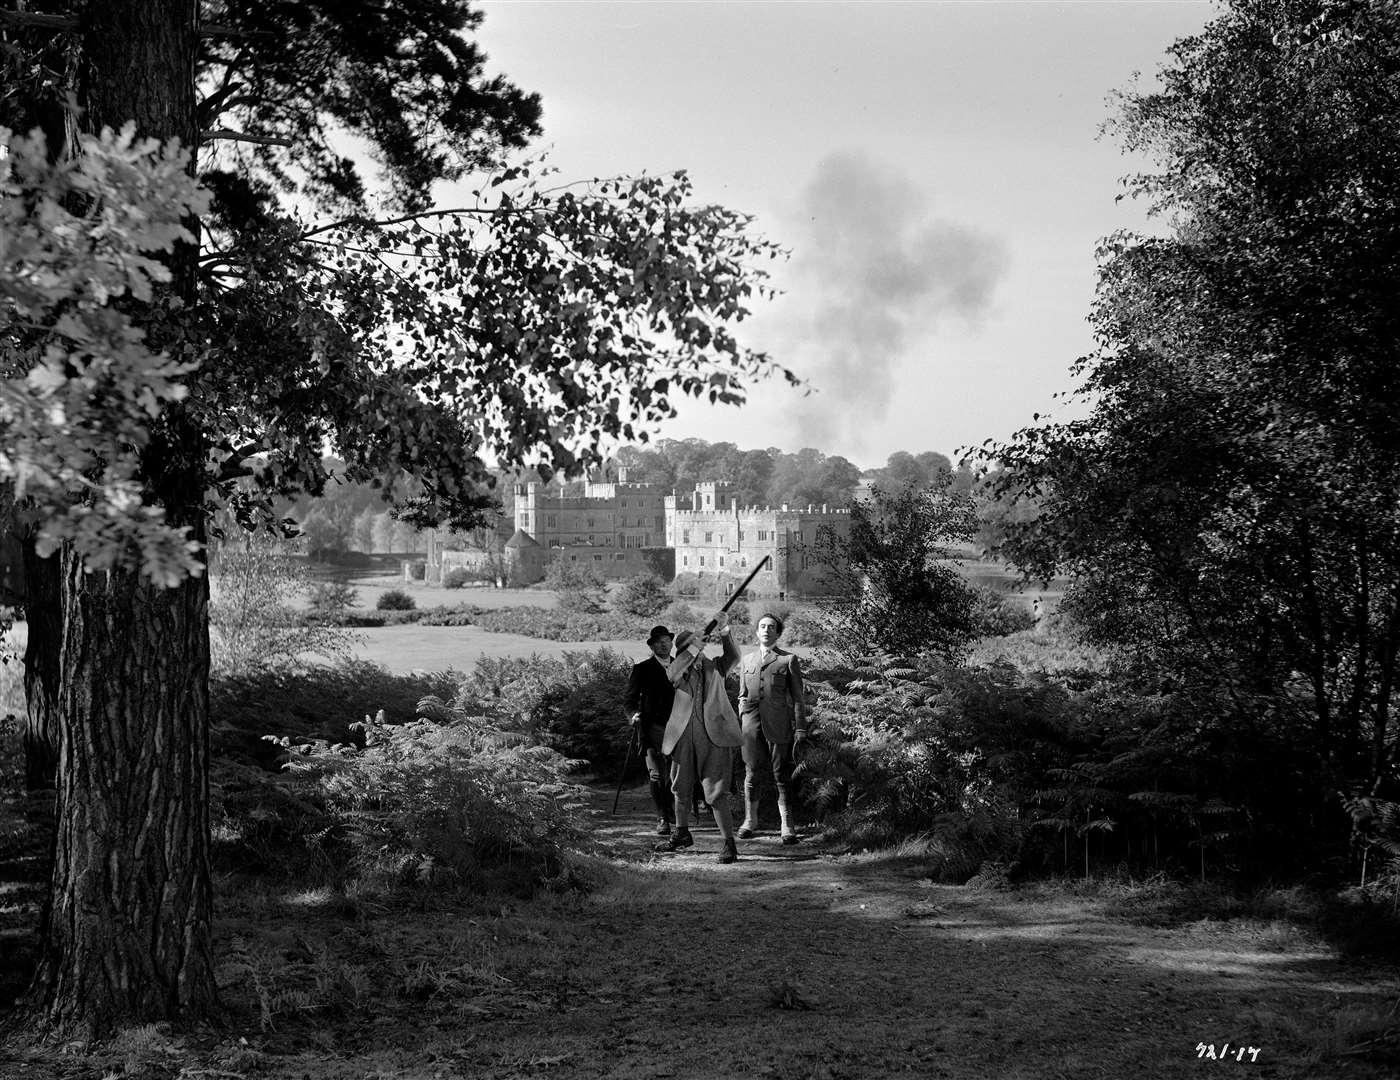 Filming that took place at Leeds Castle for Kind Hearts and Coronets, starring Alec Guinness and Dennis Price. Image supplied by Edith Chappey, 020 7534 2759